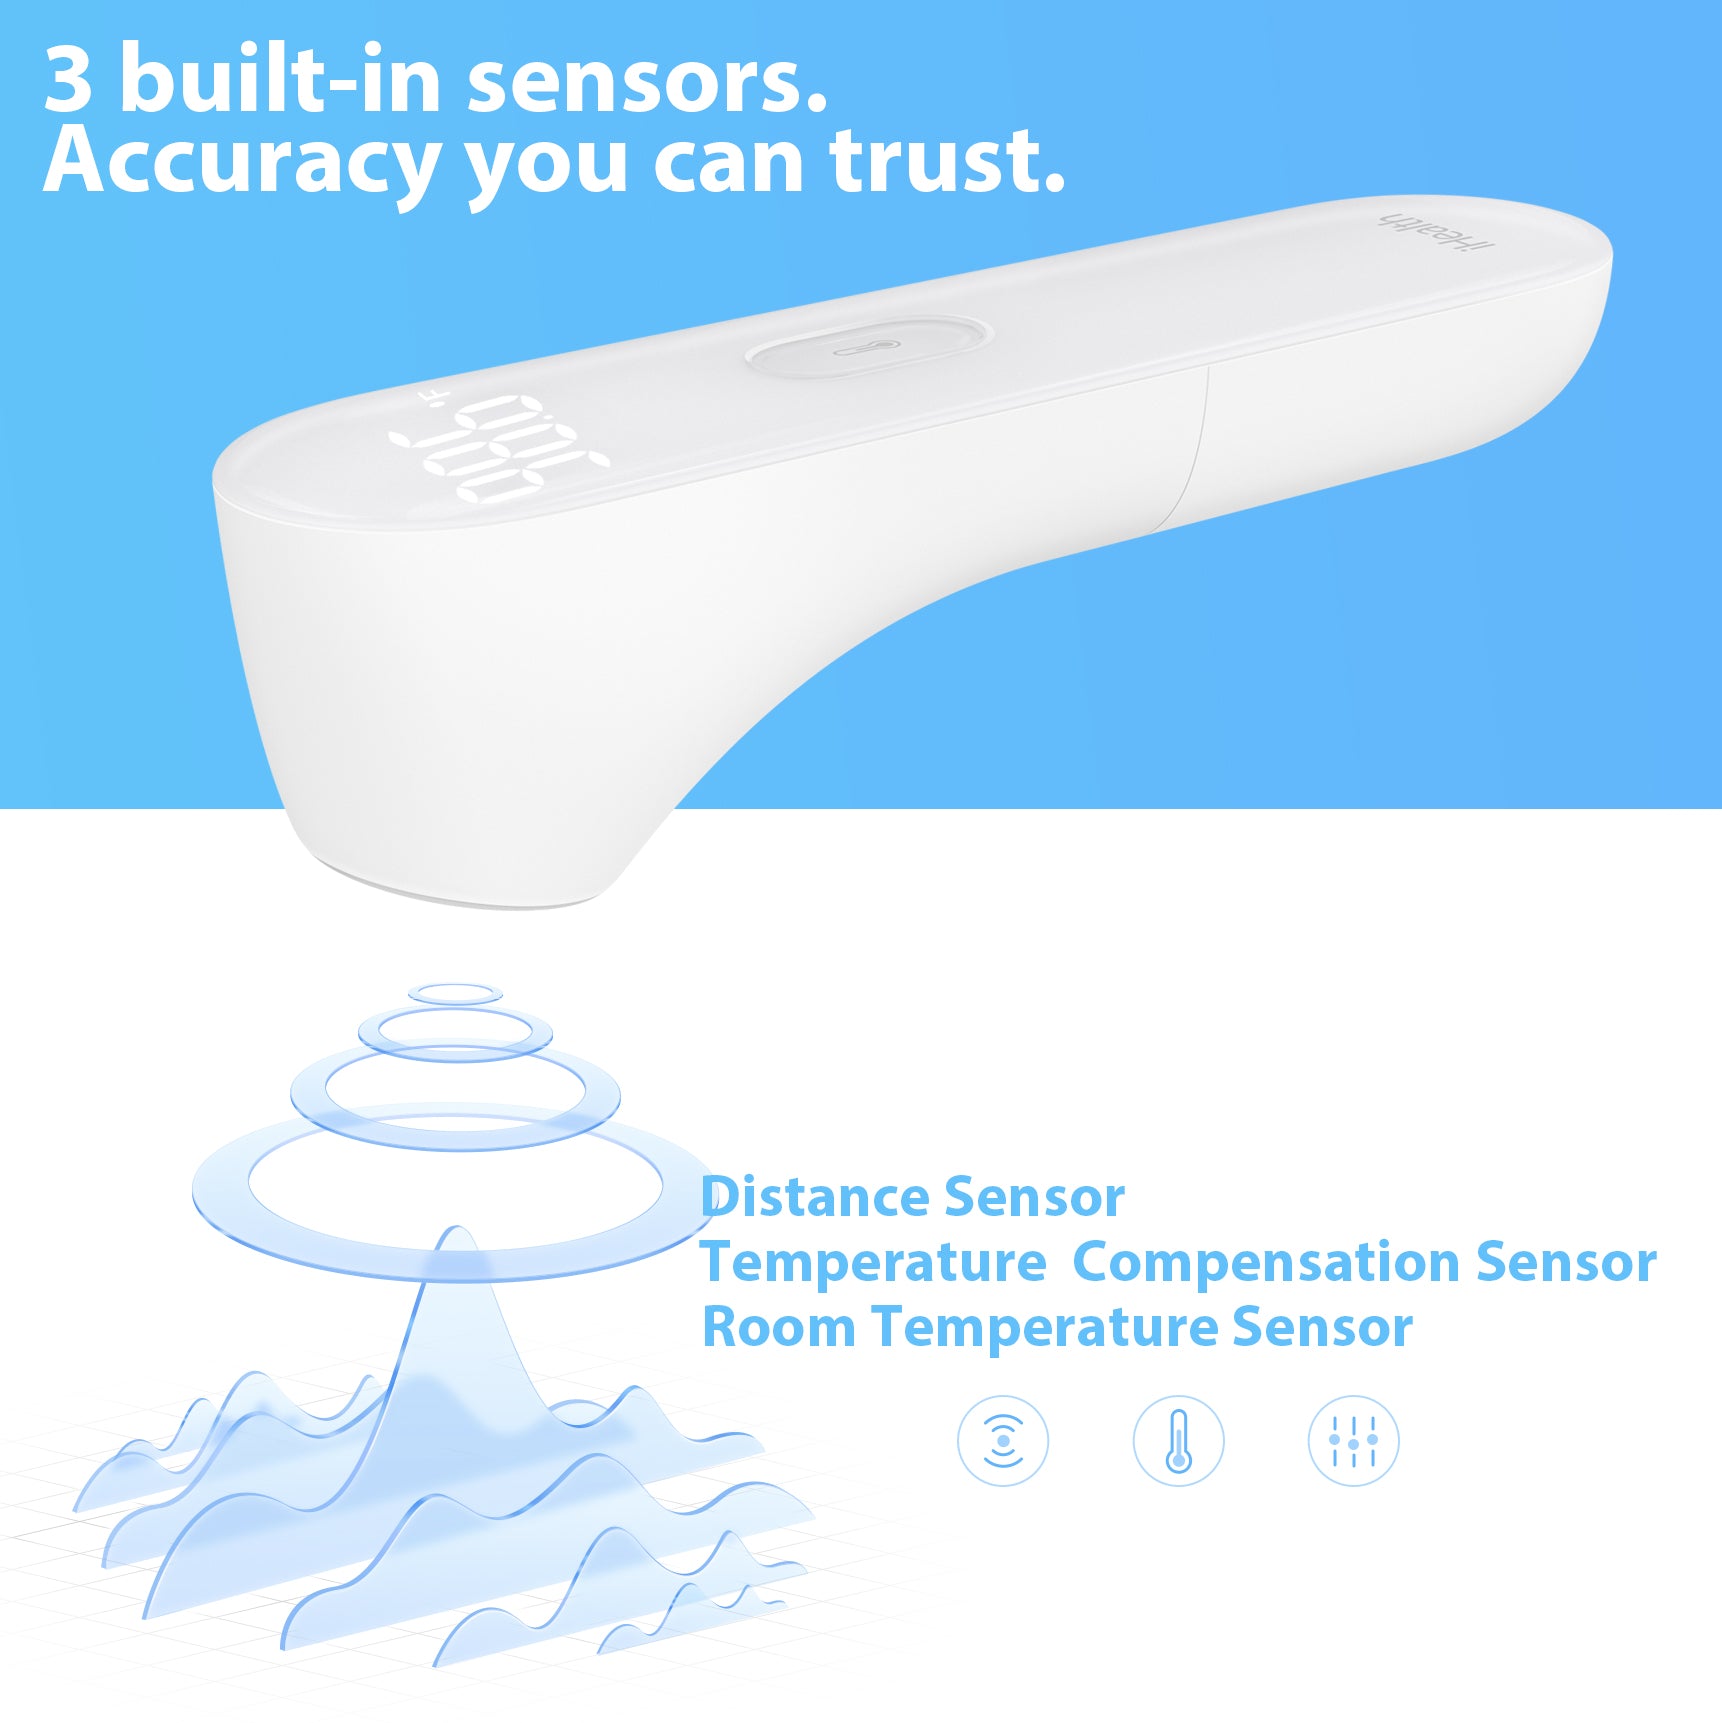 Infographic about iHealth PT3 non-contact infrared forehead thermometer's distance sensor, temperature compensation sensor, and room temperature sensors